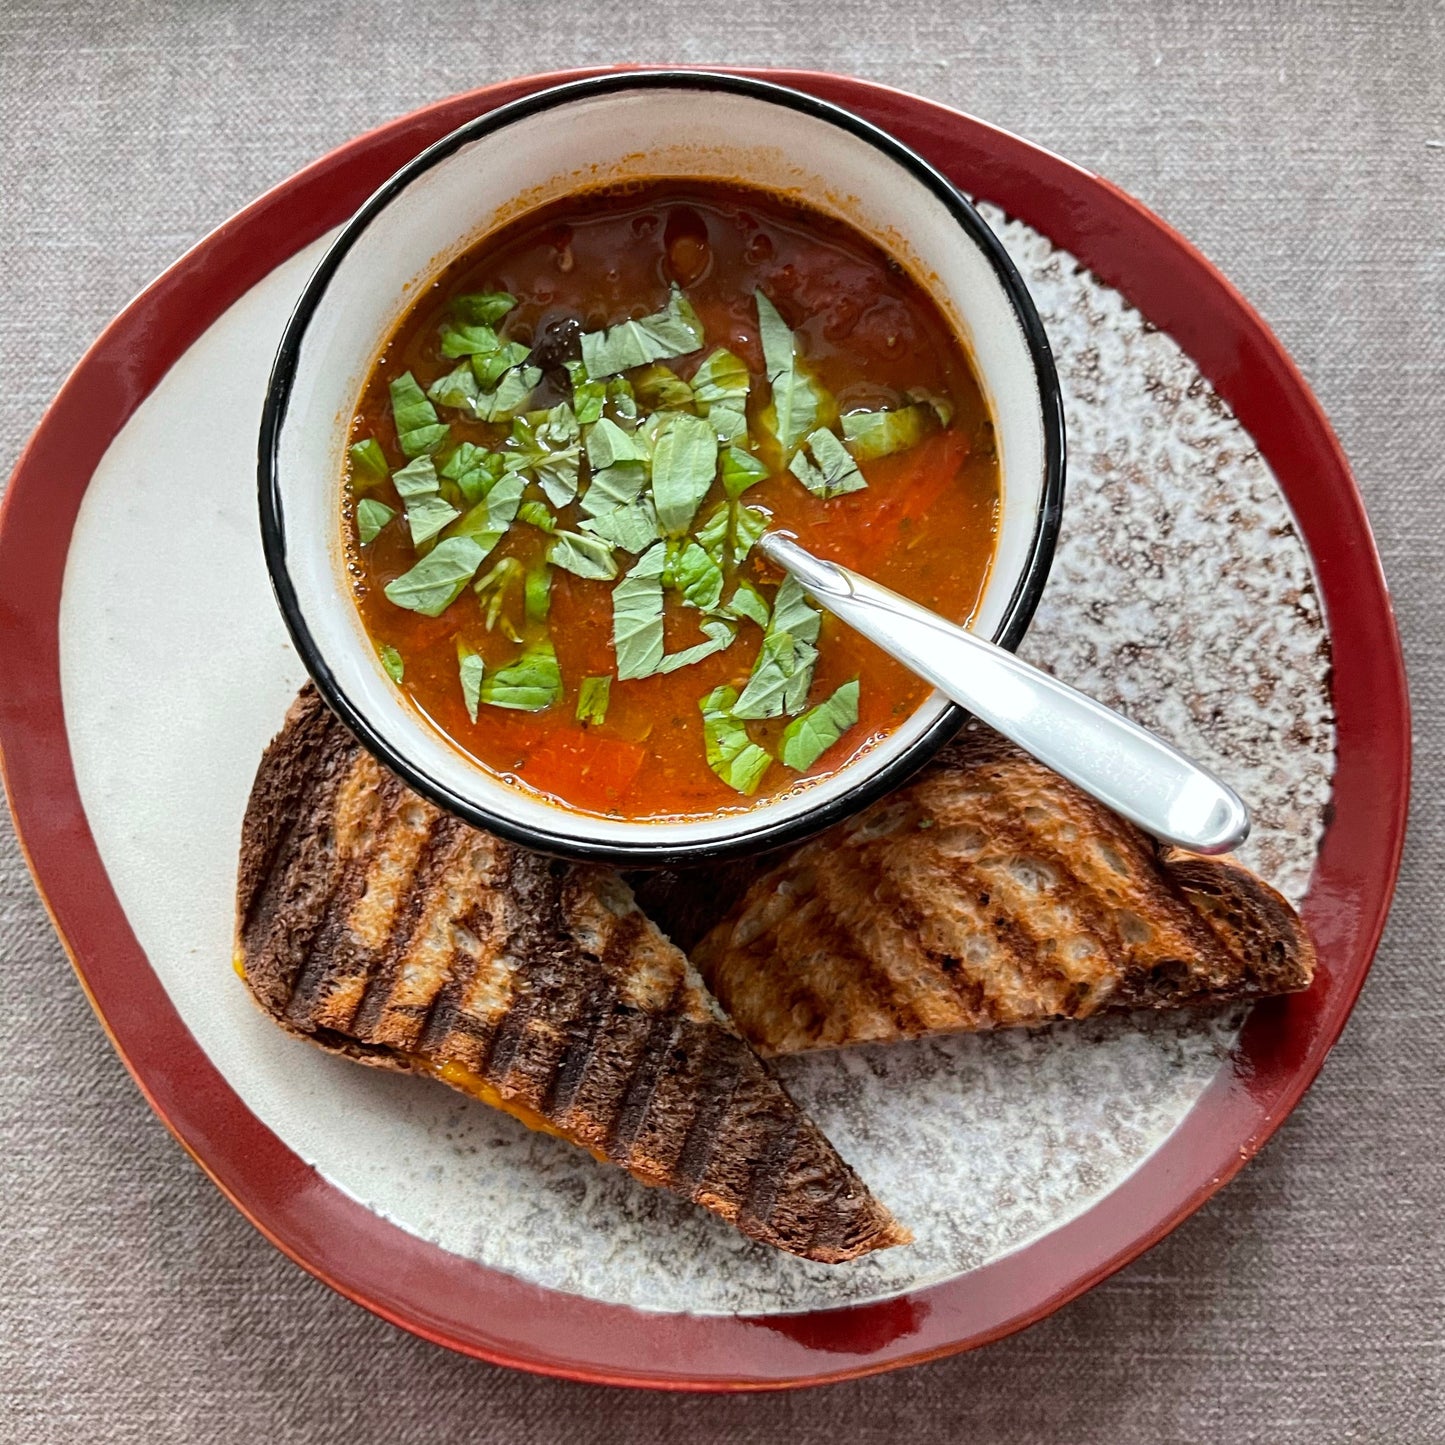 organic shaped dinner plate frost by HKliving USA with a bowl of tomato soup and grilled cheese